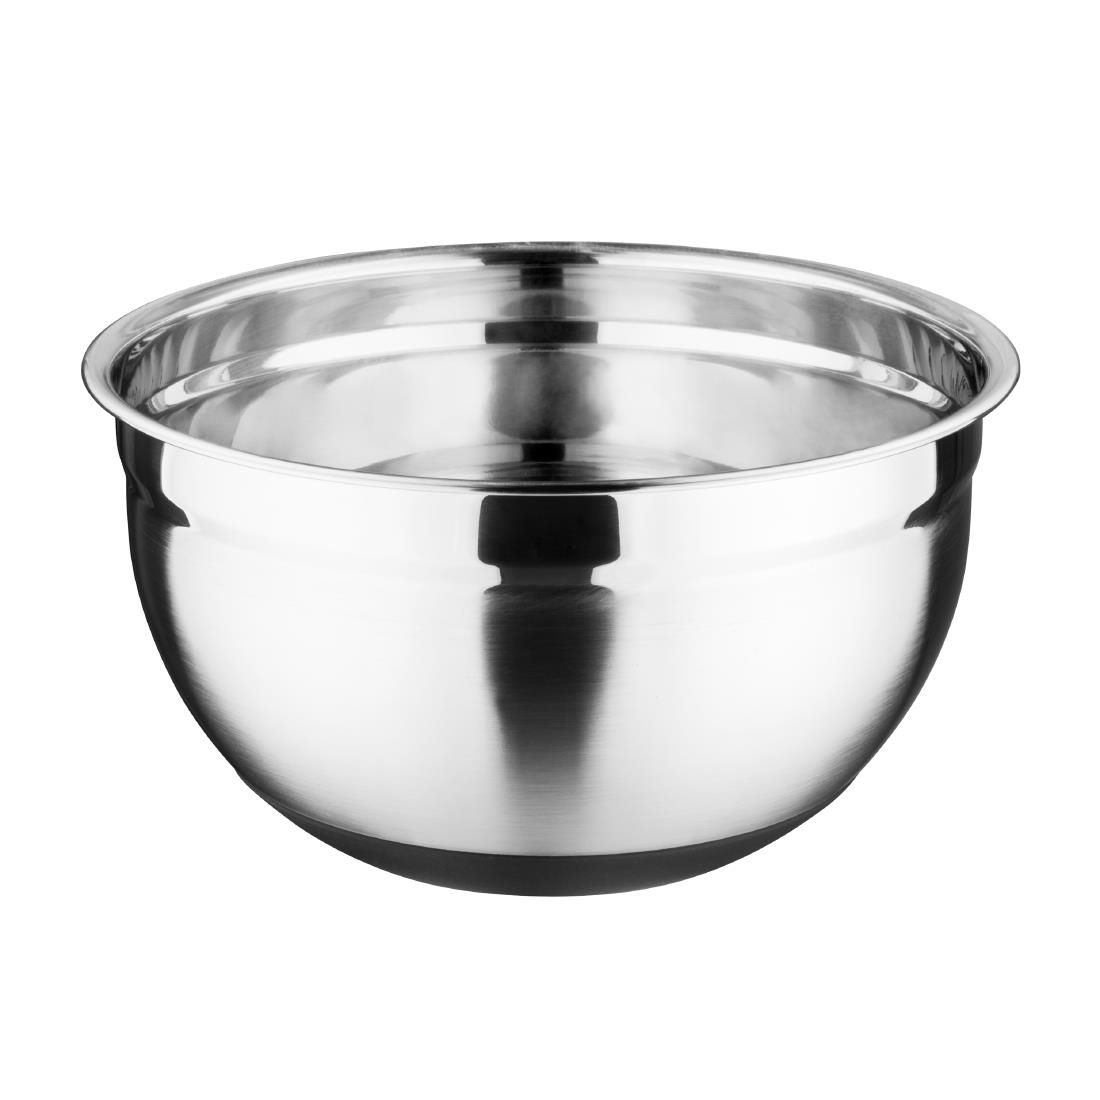 Vogue Stainless Steel Bowl with Silicone Base 5Ltr